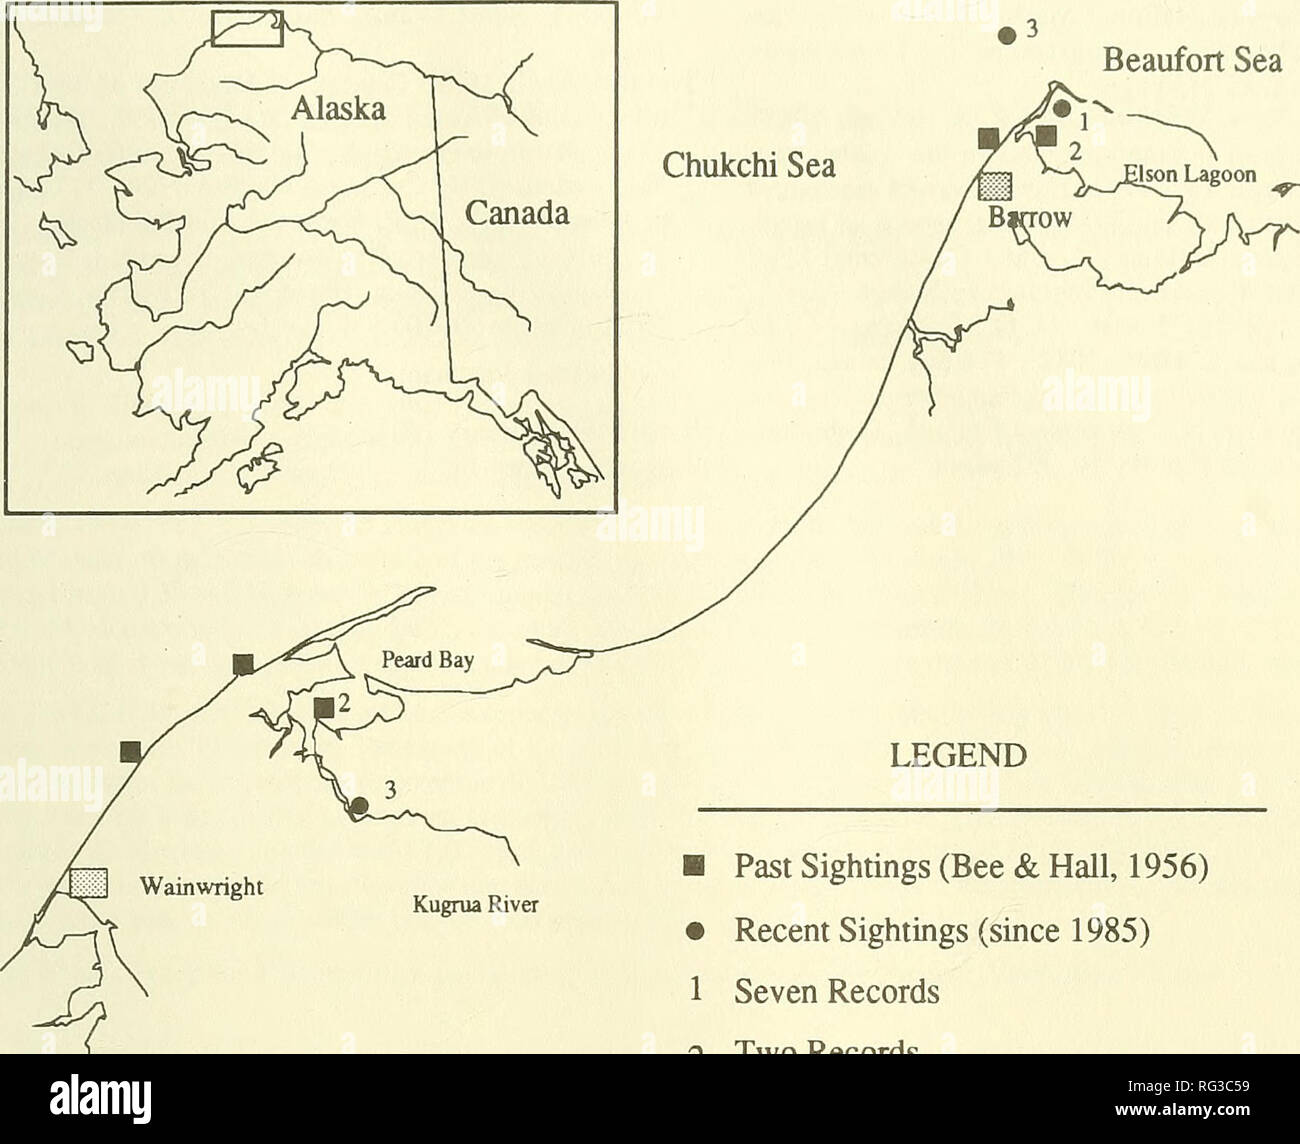 . The Canadian field-naturalist. 1992 SuYDAM AND George: Harbour Porpoises near Point Barrow 491 159 I 158  L  157 156 Beaufort Sea. LEGEND Kugrua River â Past Sightings (Bee &amp; Hall, 1956) â¢ Recent Sightings (since 1985) 1 Seven Records 2 Two Records 3 Exact Location Unknown â 20 â 10 â 71 â 50' â 40 Figure 1. Locations of recent and past sightings of Harbour Porpoise in the Point Barrow area. Porpoises. Kathy Frost, D. E. Gaskin, Lloyd Lowry, David Norton and two anonymous reviewers provided helpful comments on the manuscript. This project was supported by the North Slope Borough, Depart Stock Photo